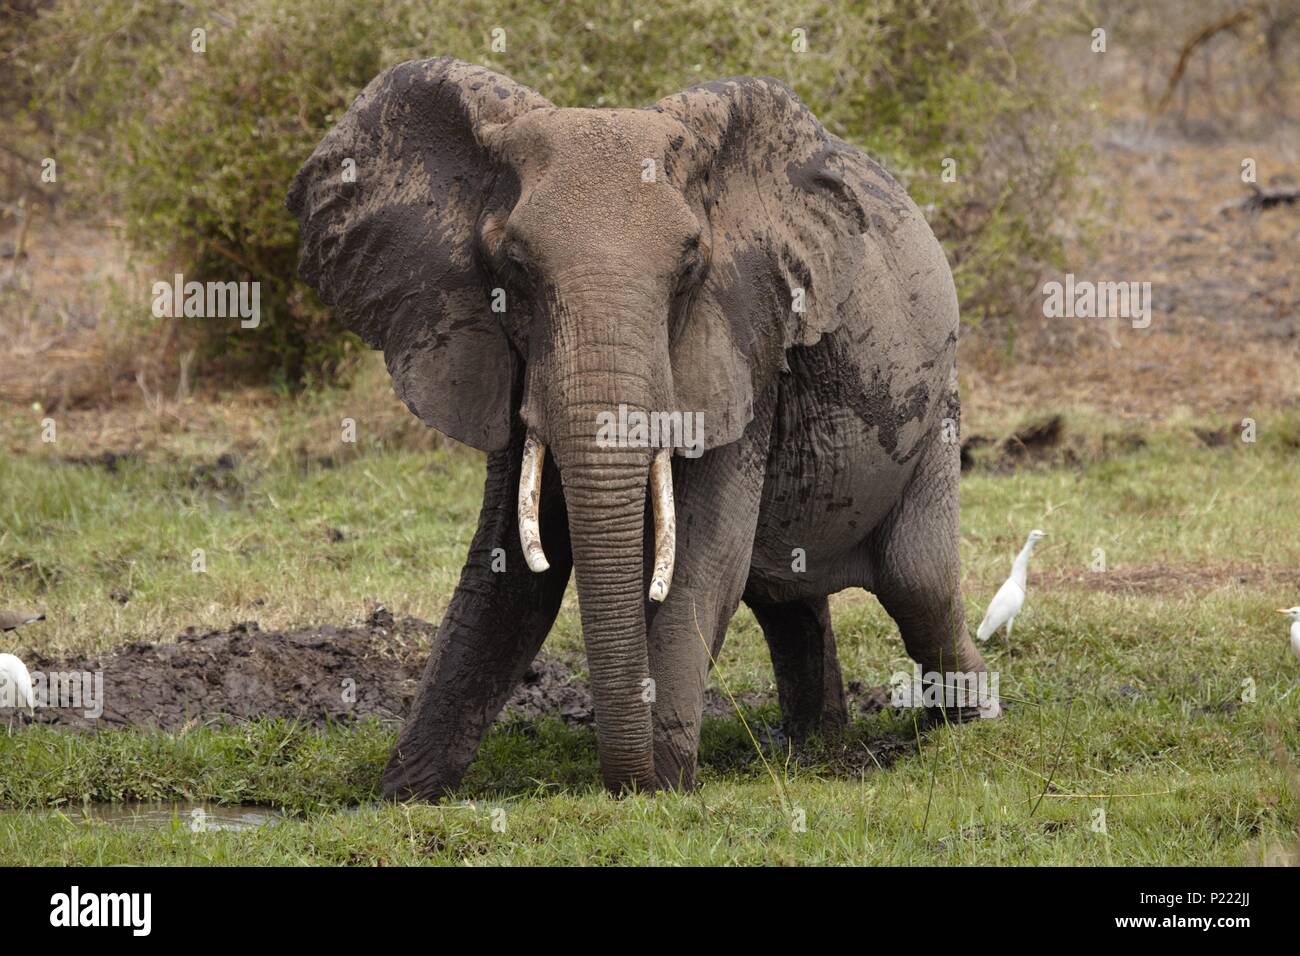 A large African elephant makes a bad-tempered display by flapping her ears Stock Photo